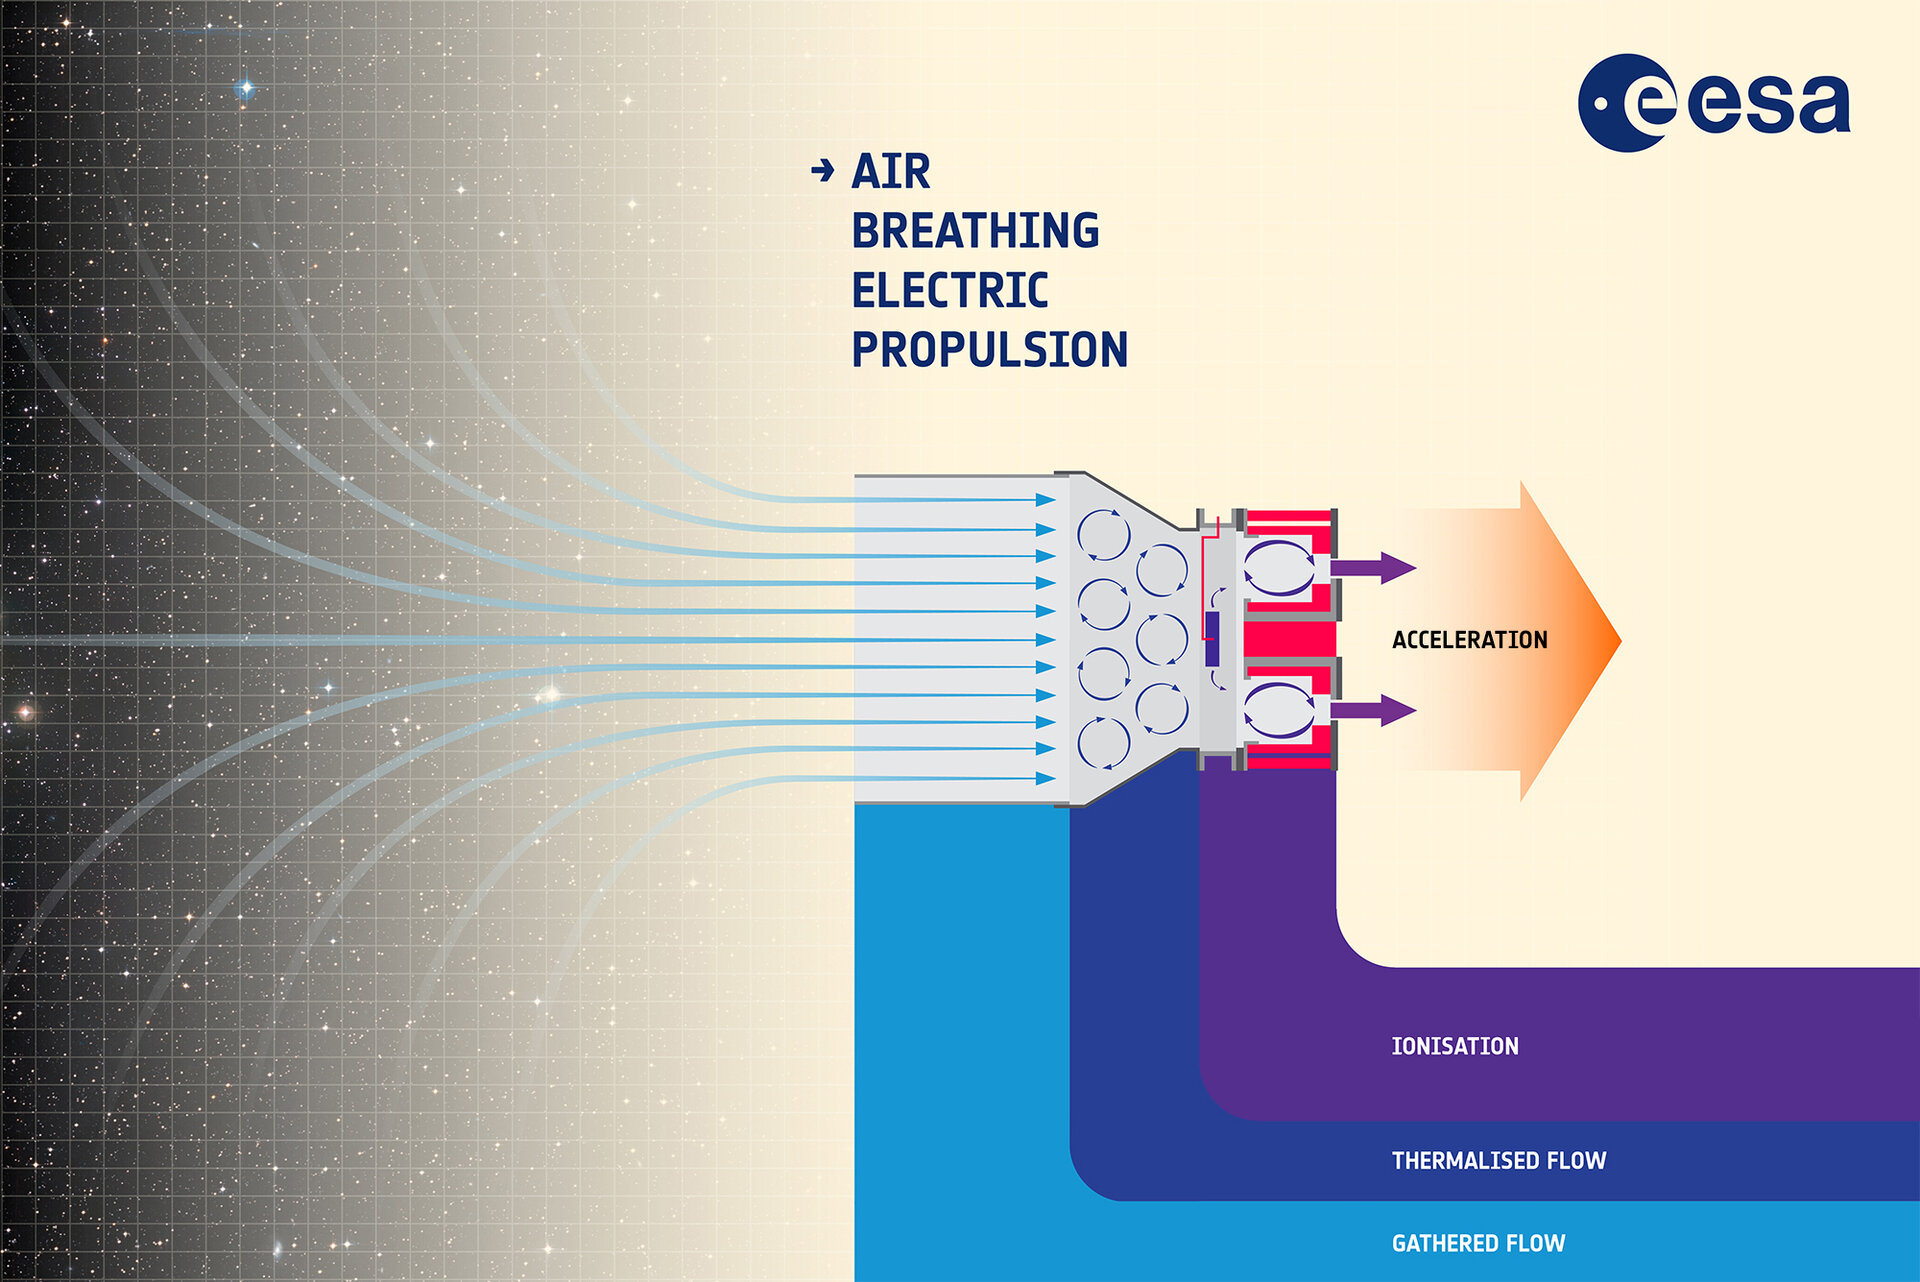 Air-breathing electric propulsion